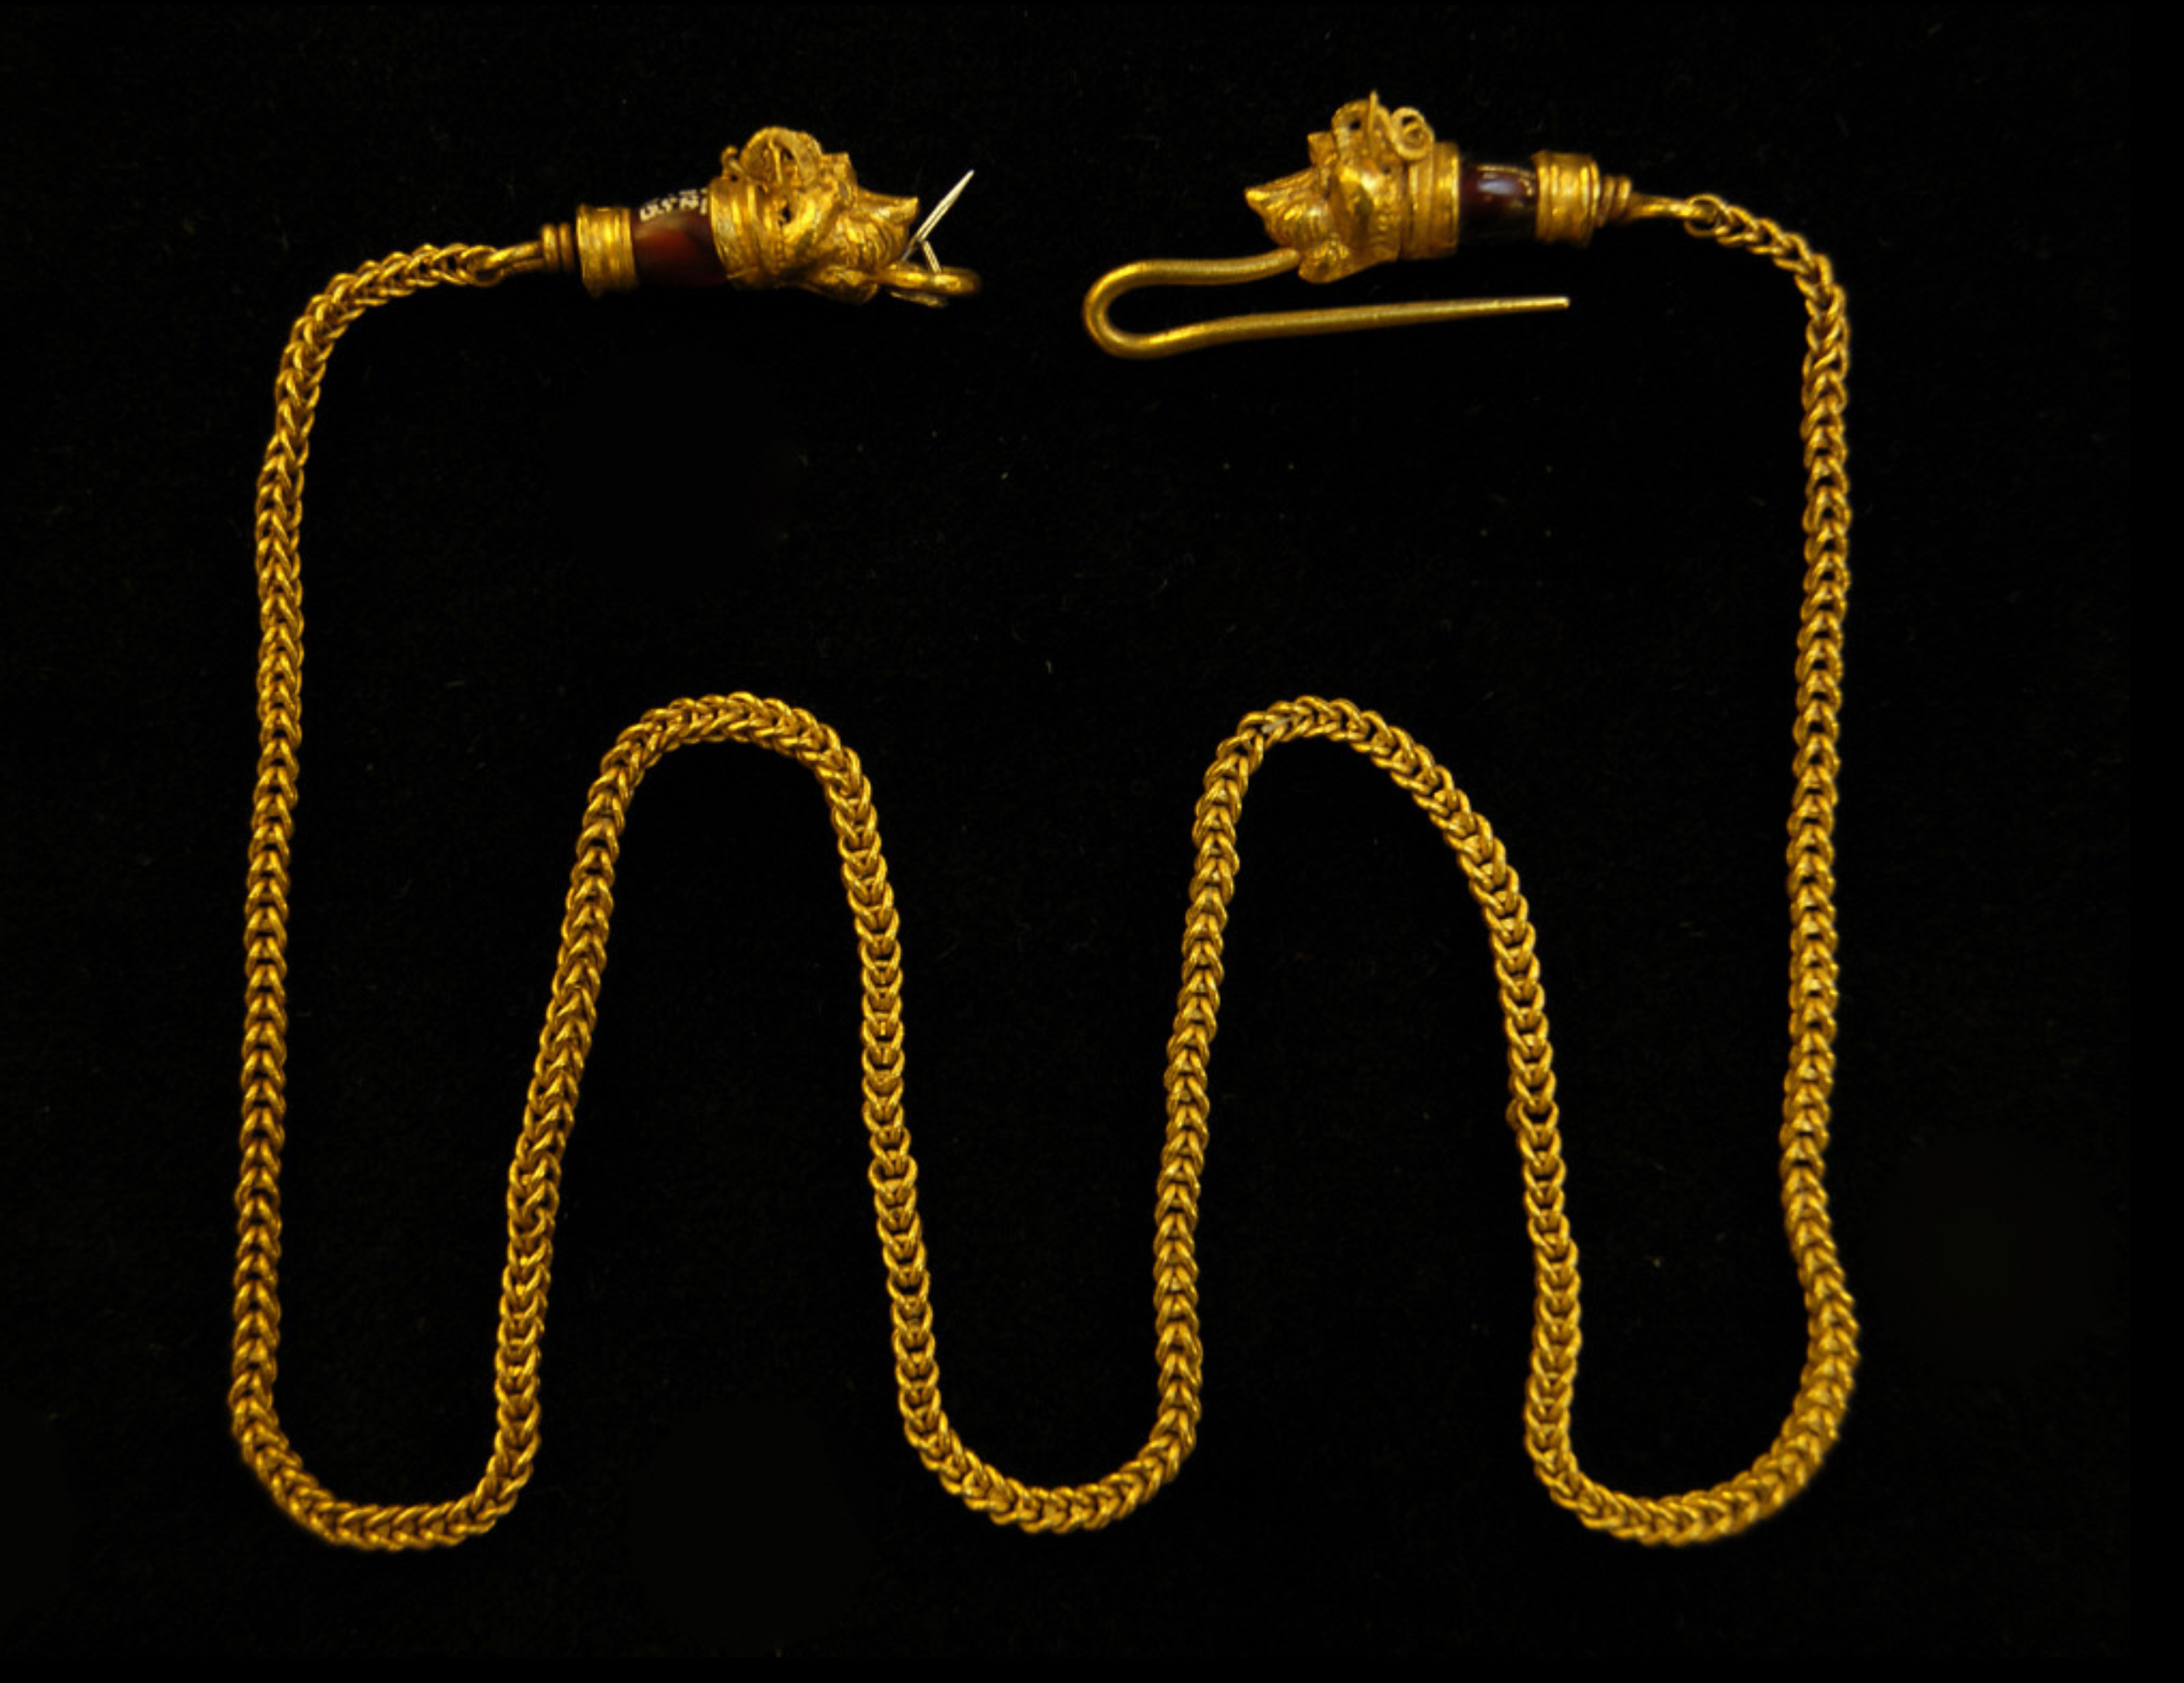 Gold chain with lion's head clasp, 3rd BC, excavated Cyprus, British Musuem.